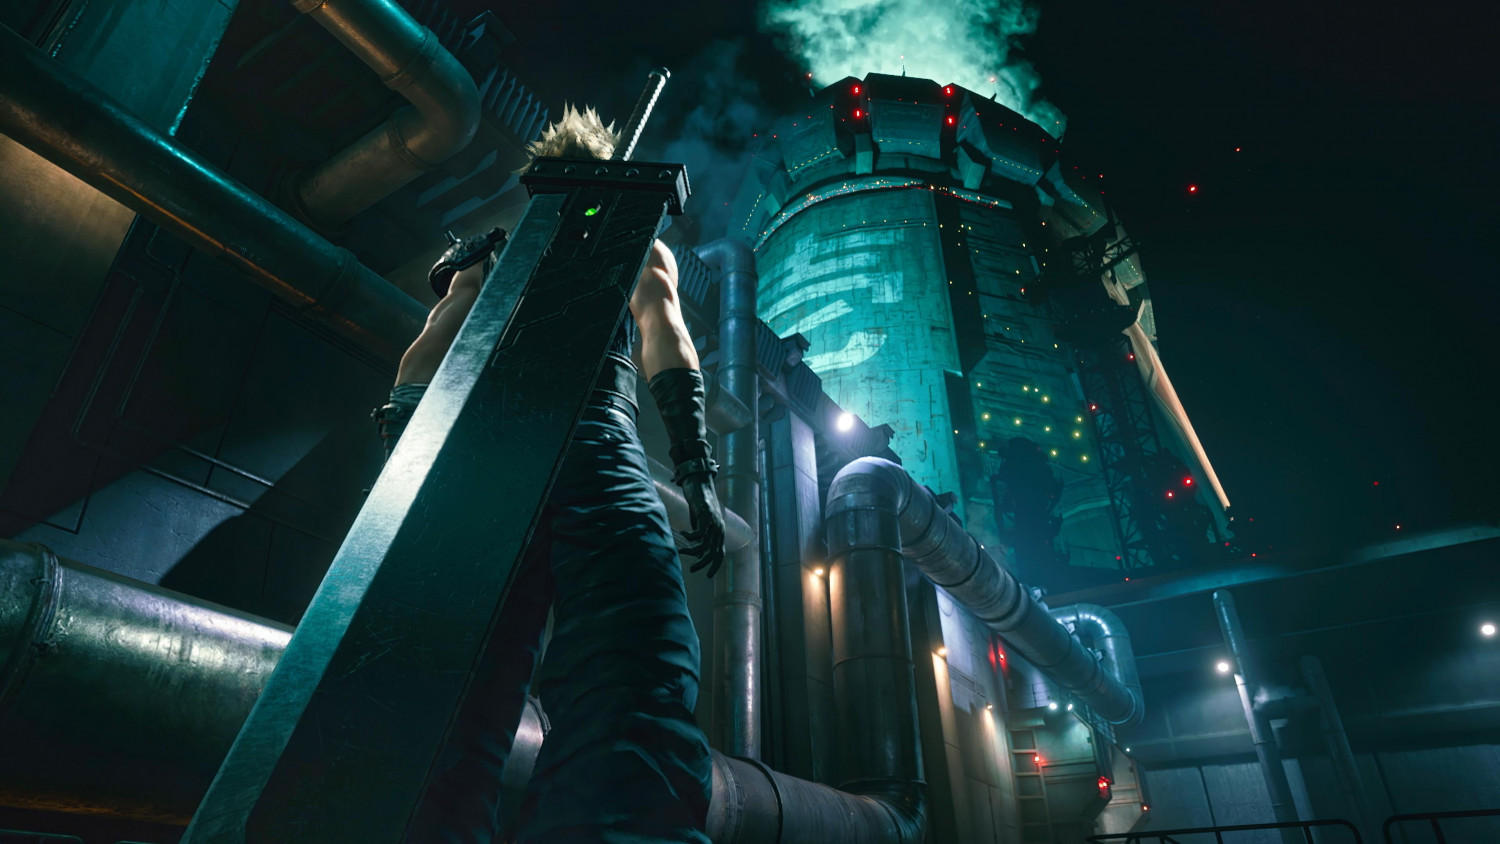 Final Fantasy 7 Remake: How To Reach The Top Of The Darts